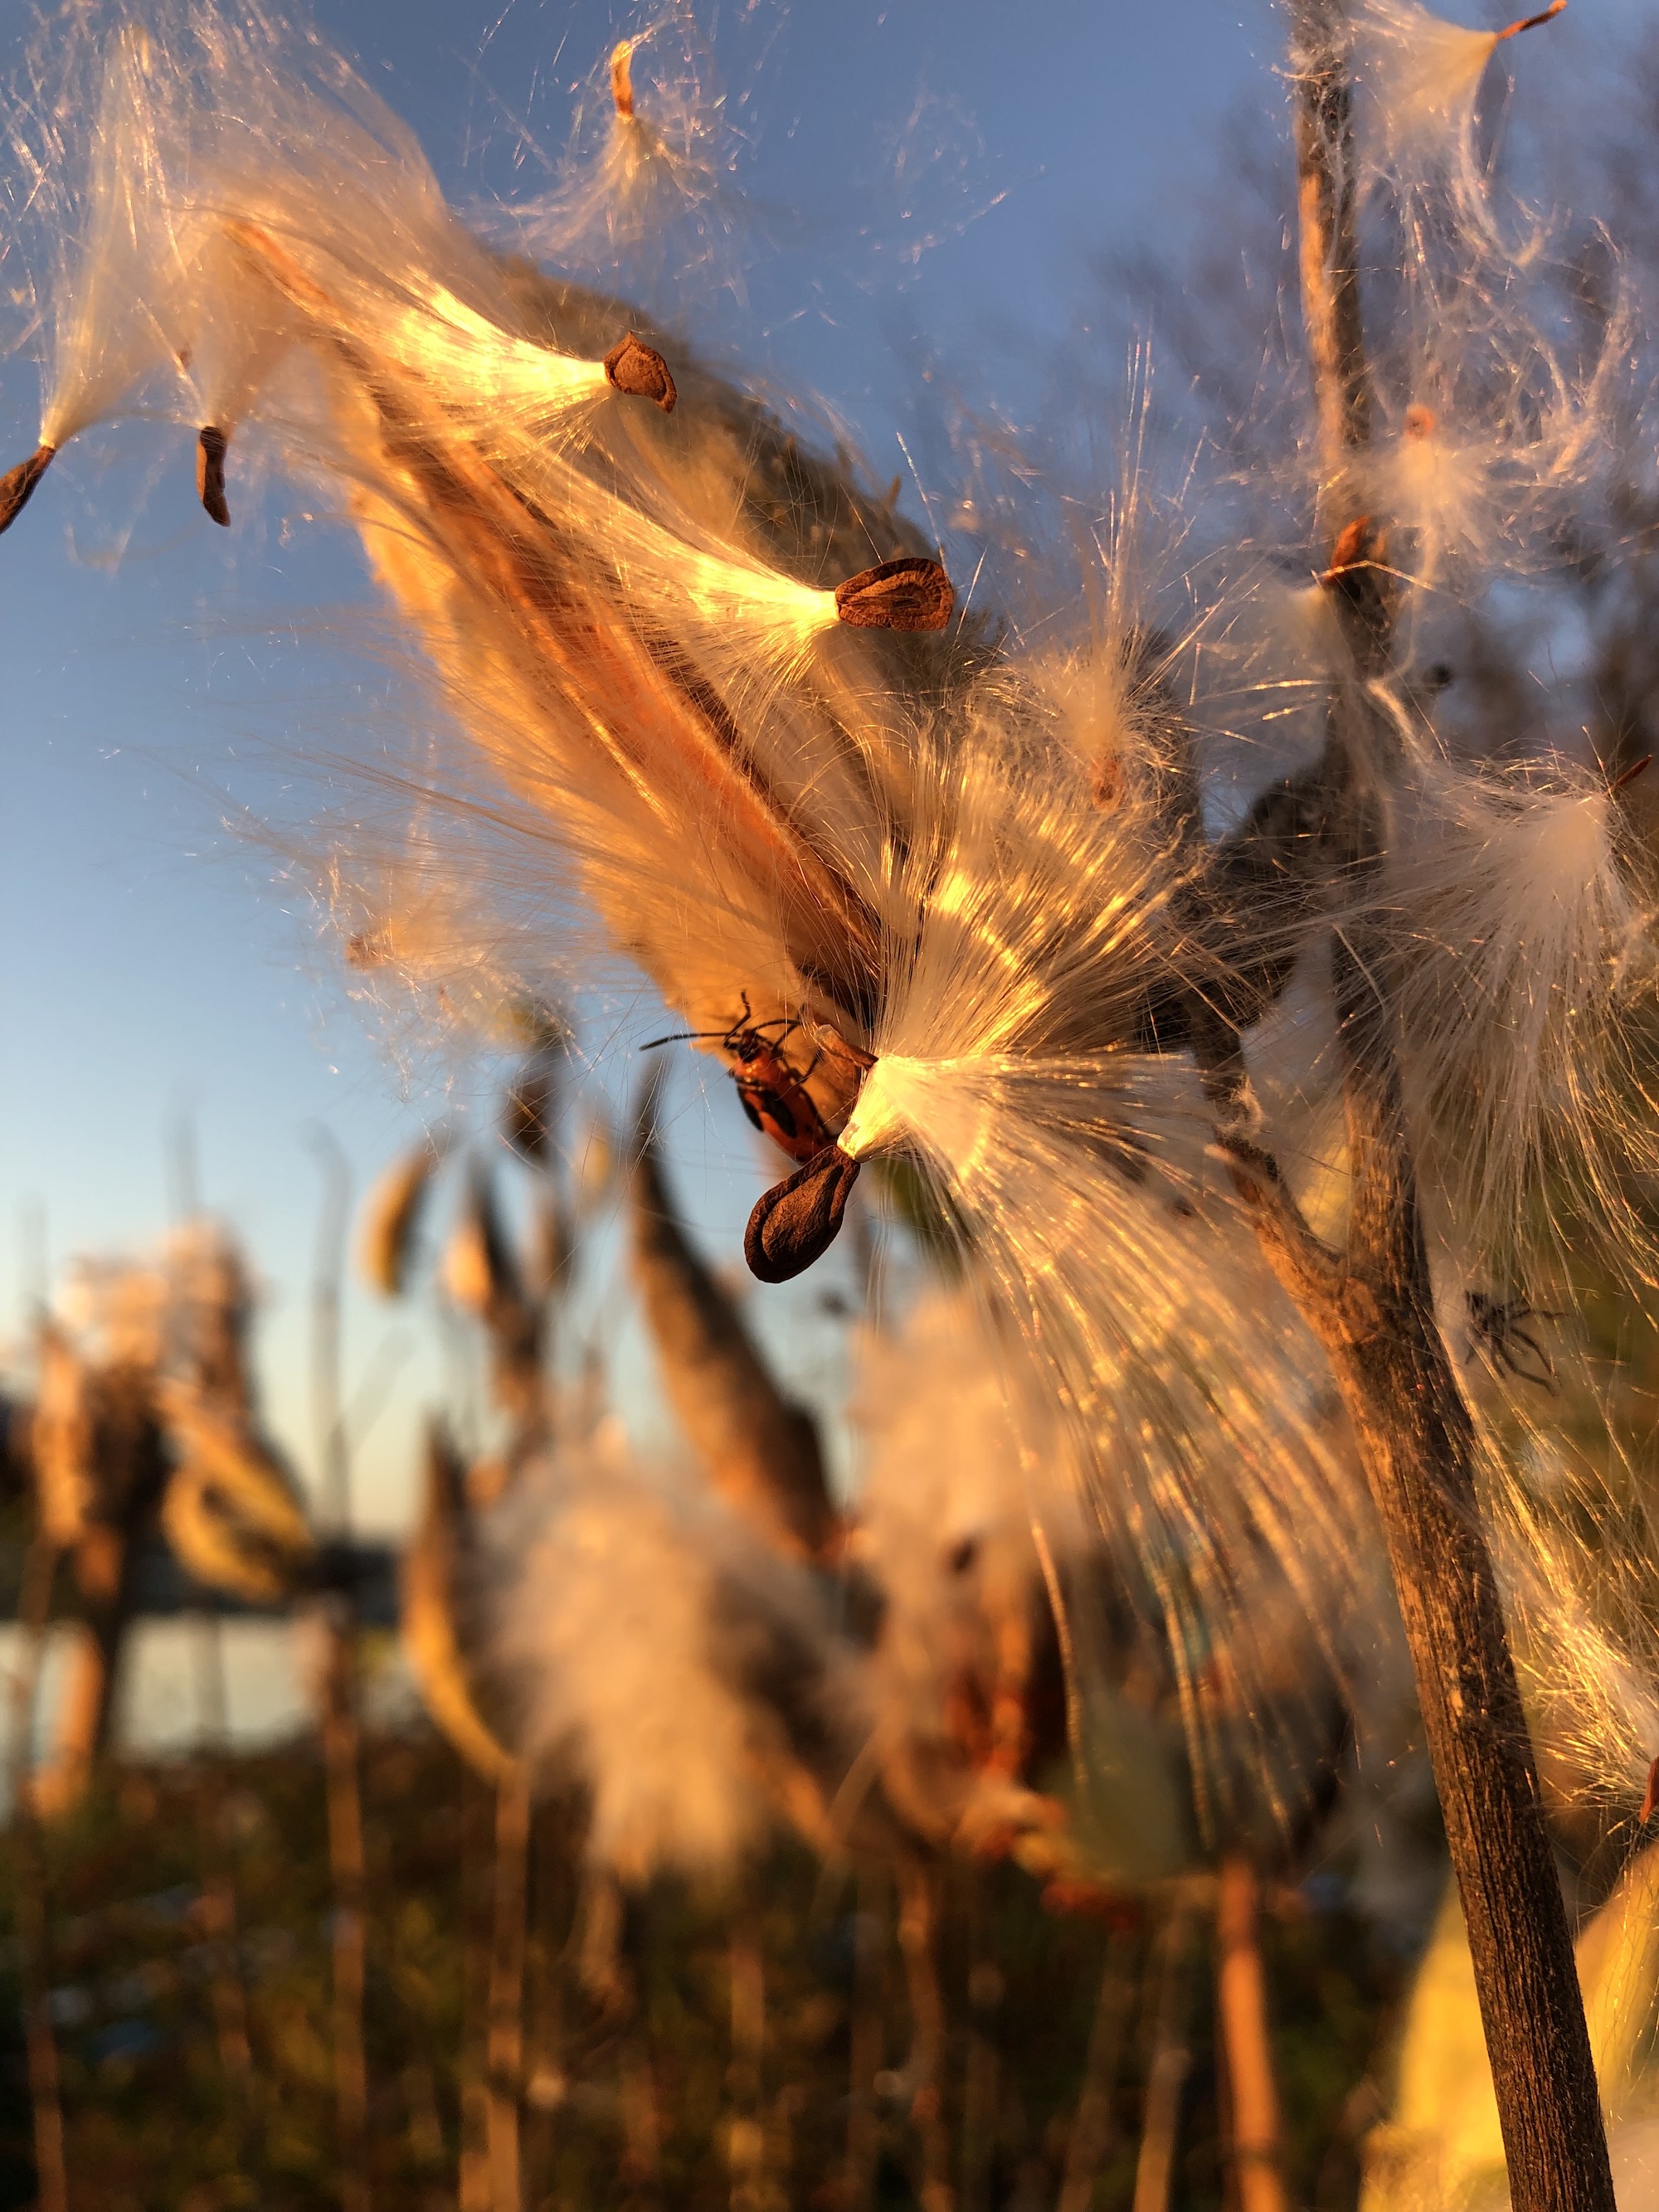 Common Milkweed by Wingra Boats on October 20, 2021.